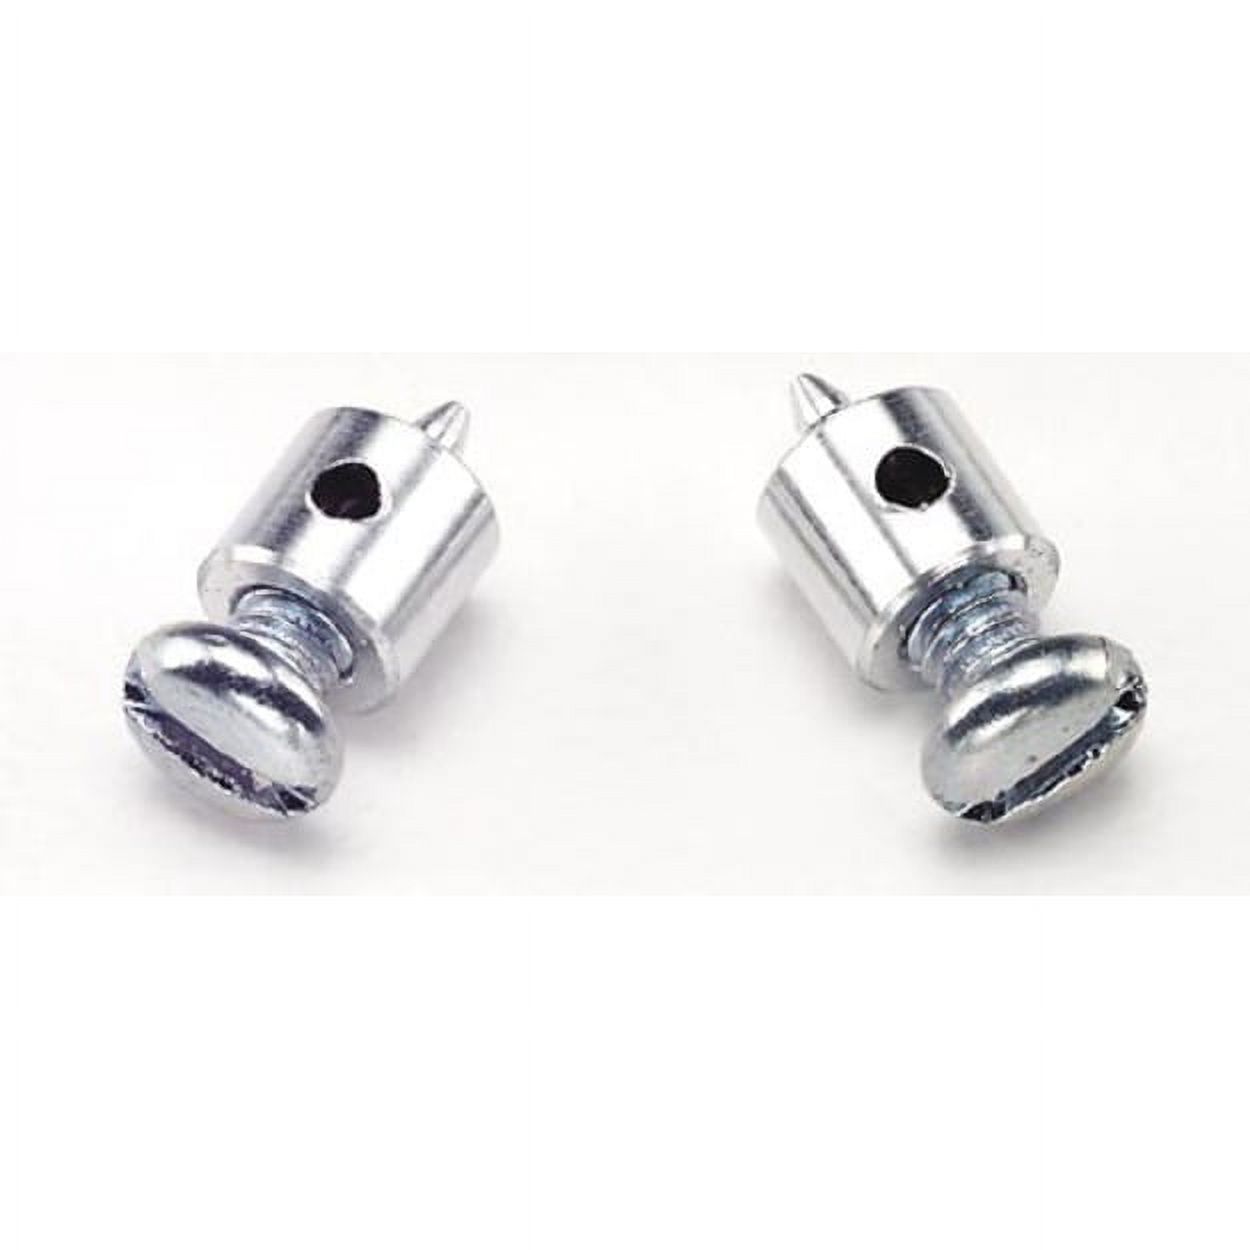 Dubro Products DUB845 Mini E-Z Connector, Pack of 2 - image 2 of 3